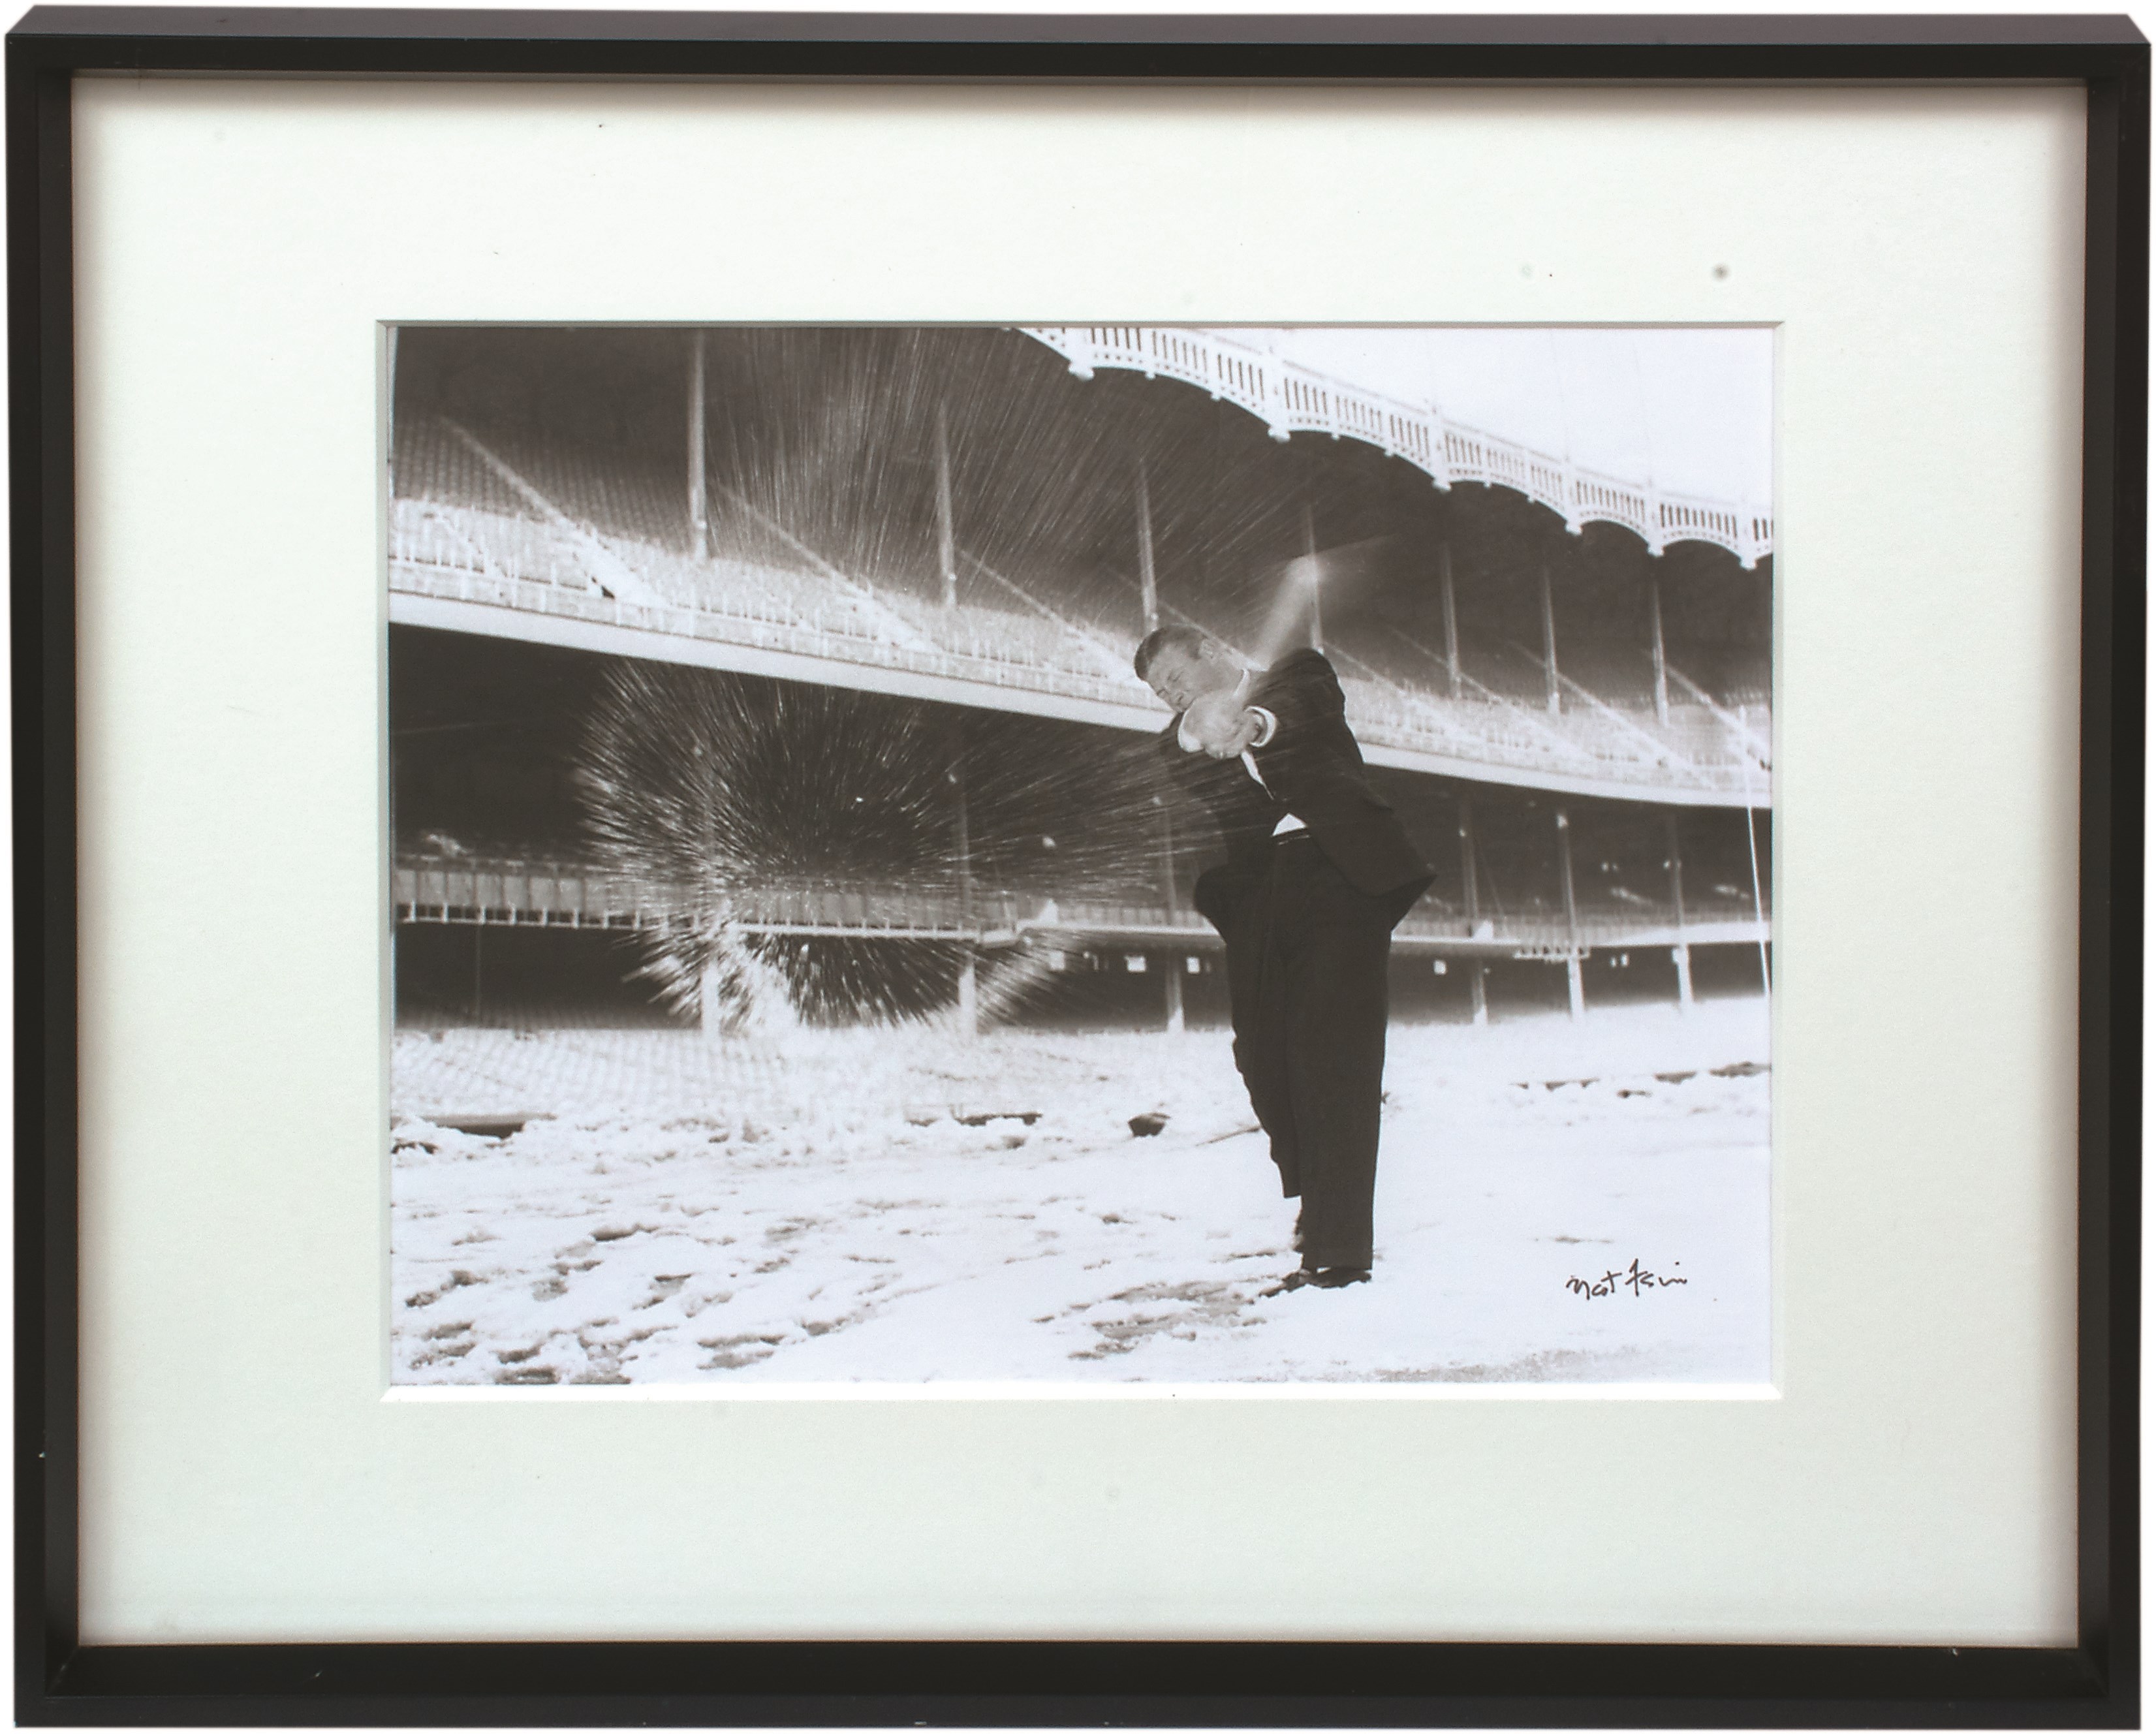 Mantle and Maris - 1957 Mickey Mantle Belting Snow Balls in Yankee Stadium Signed by Nat Fein - from Original Negative